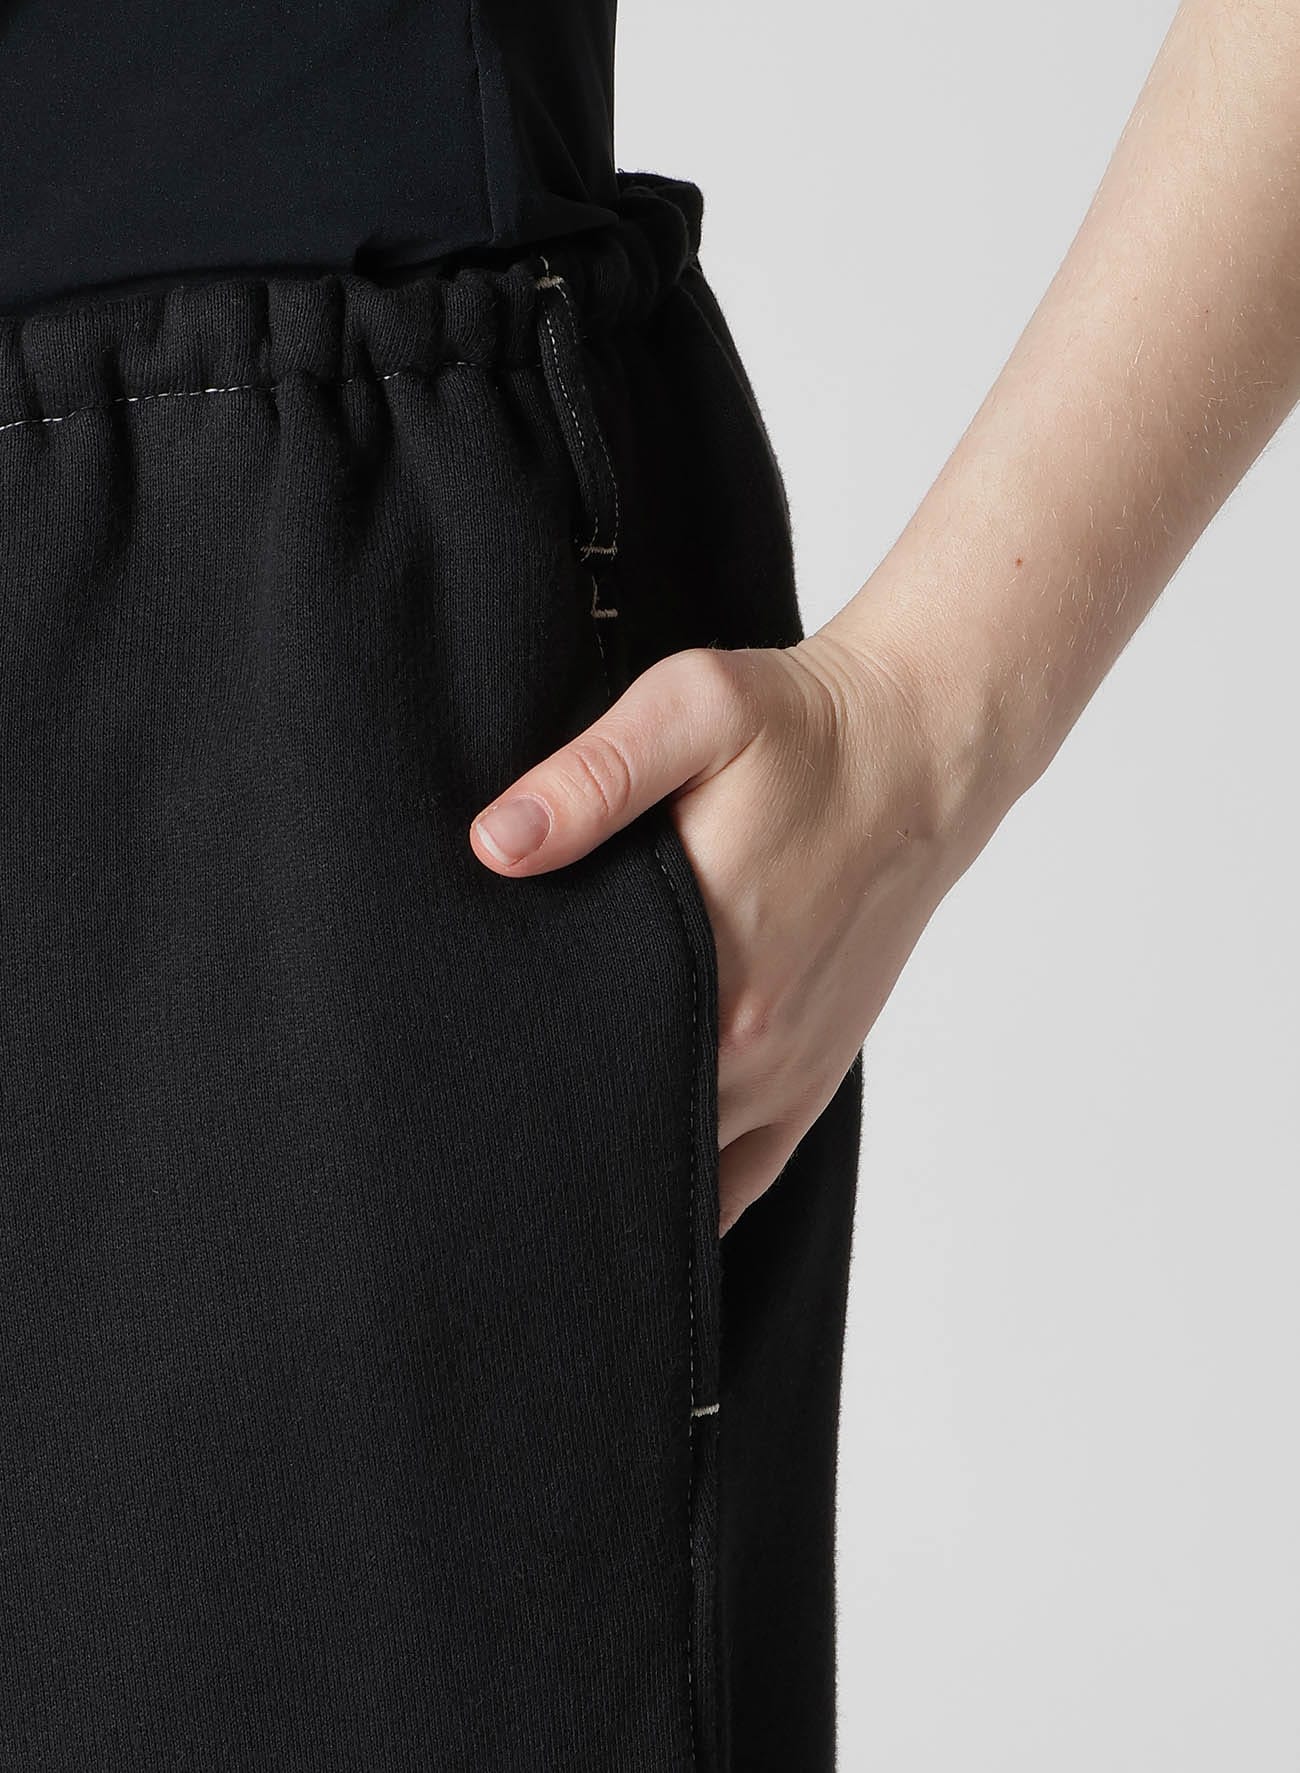 【8/2 12:00(JST) Release】FRENCH TERRY Y'S STITCH PANTS